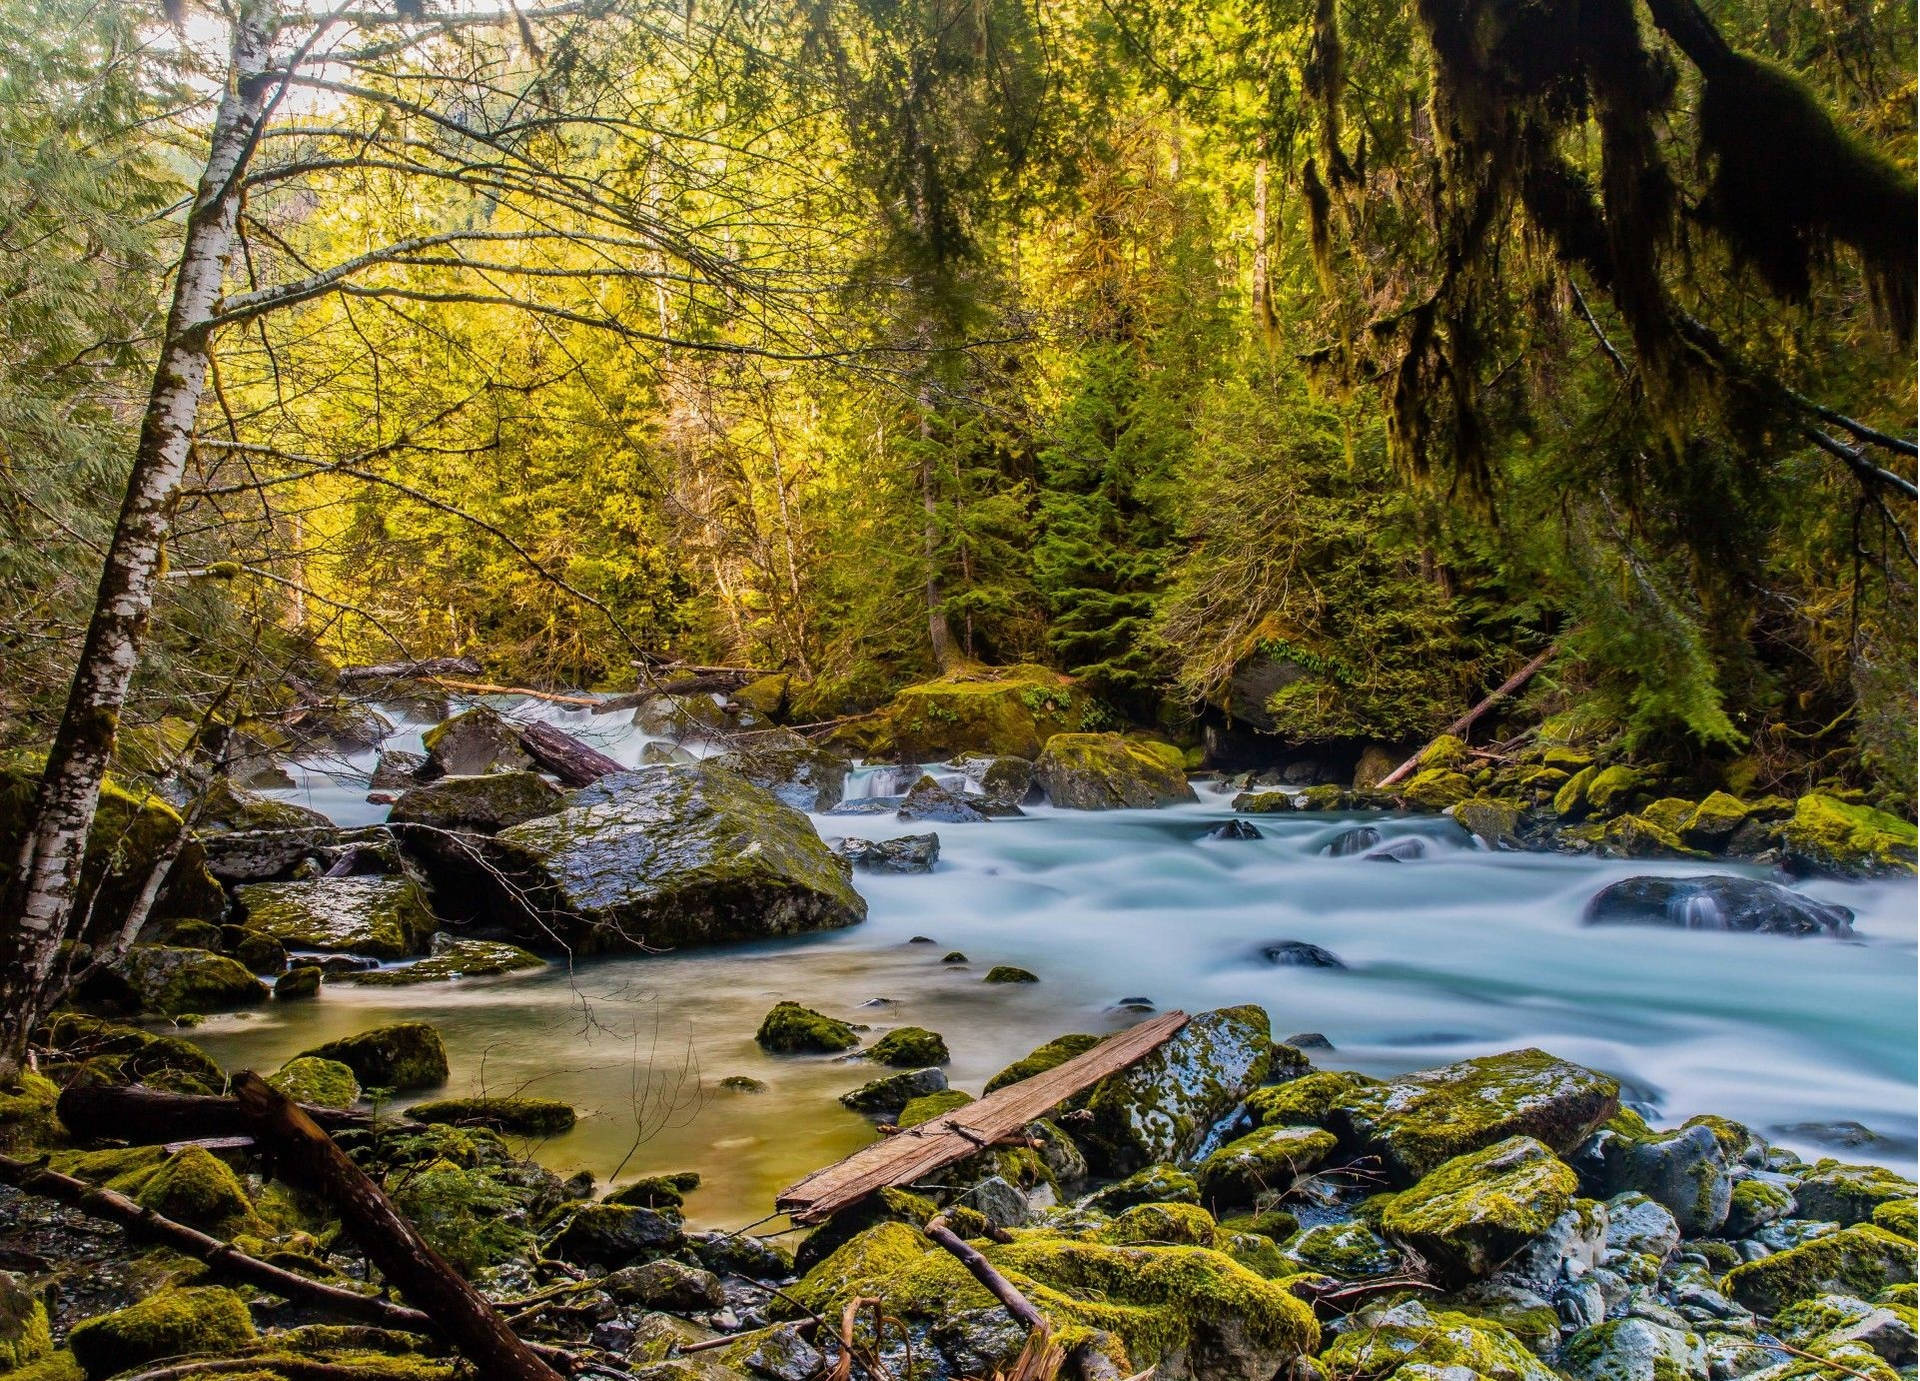 Majestic Rocky River Cutting Through The Lush Green Forest In Forks, Washington Background